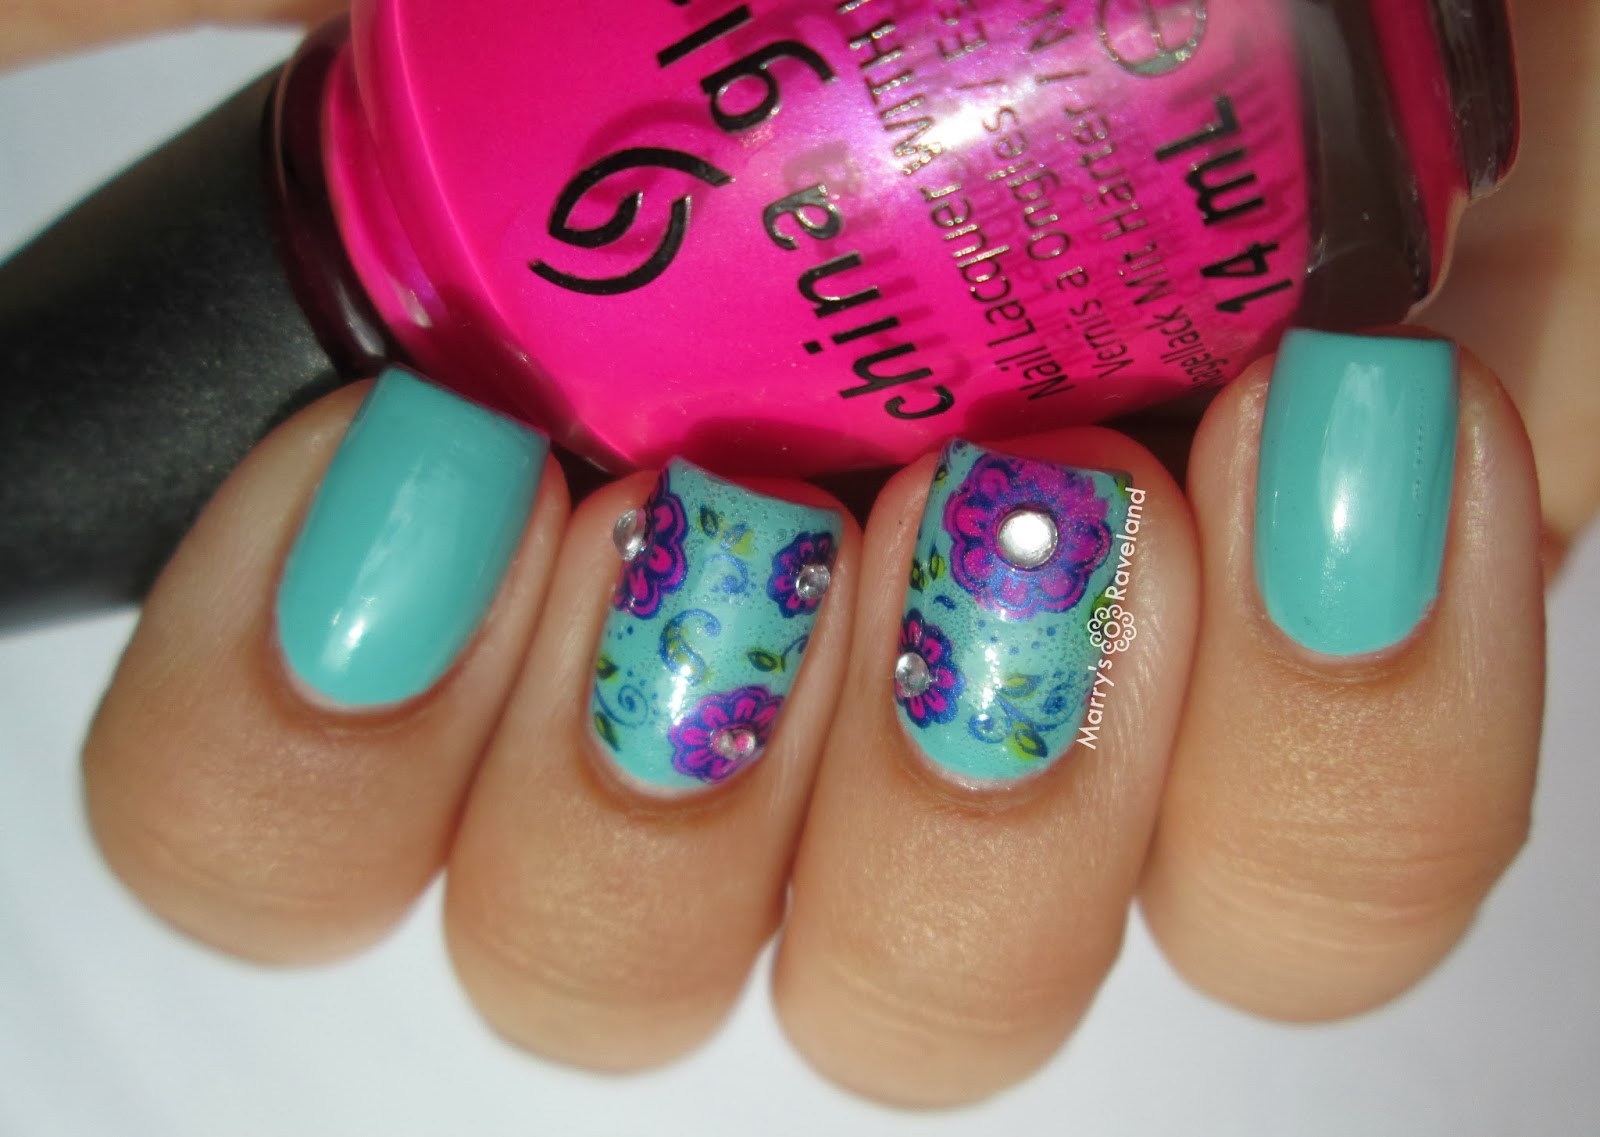 China Glaze Nail Lacquer in For Audrey - wide 5